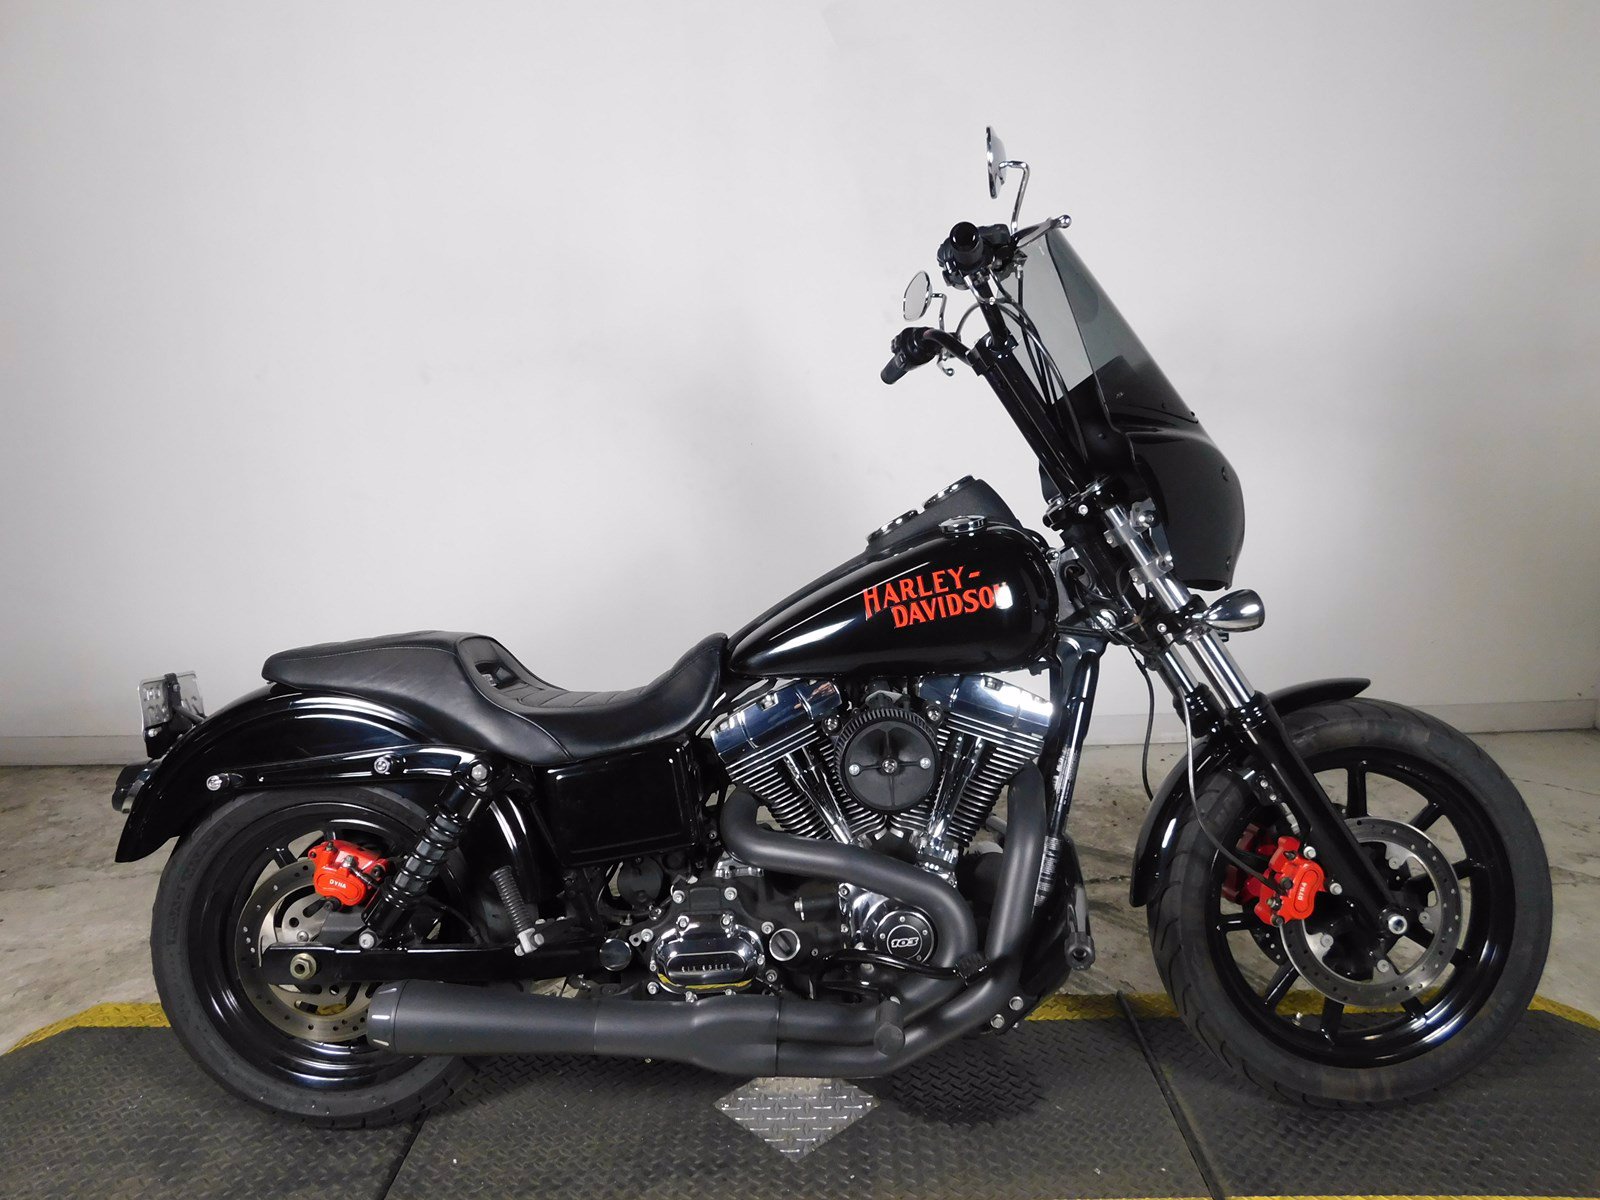 Pre-Owned 2015 Harley-Davidson Dyna Low Rider FXDL Dyna in Riverside # ...